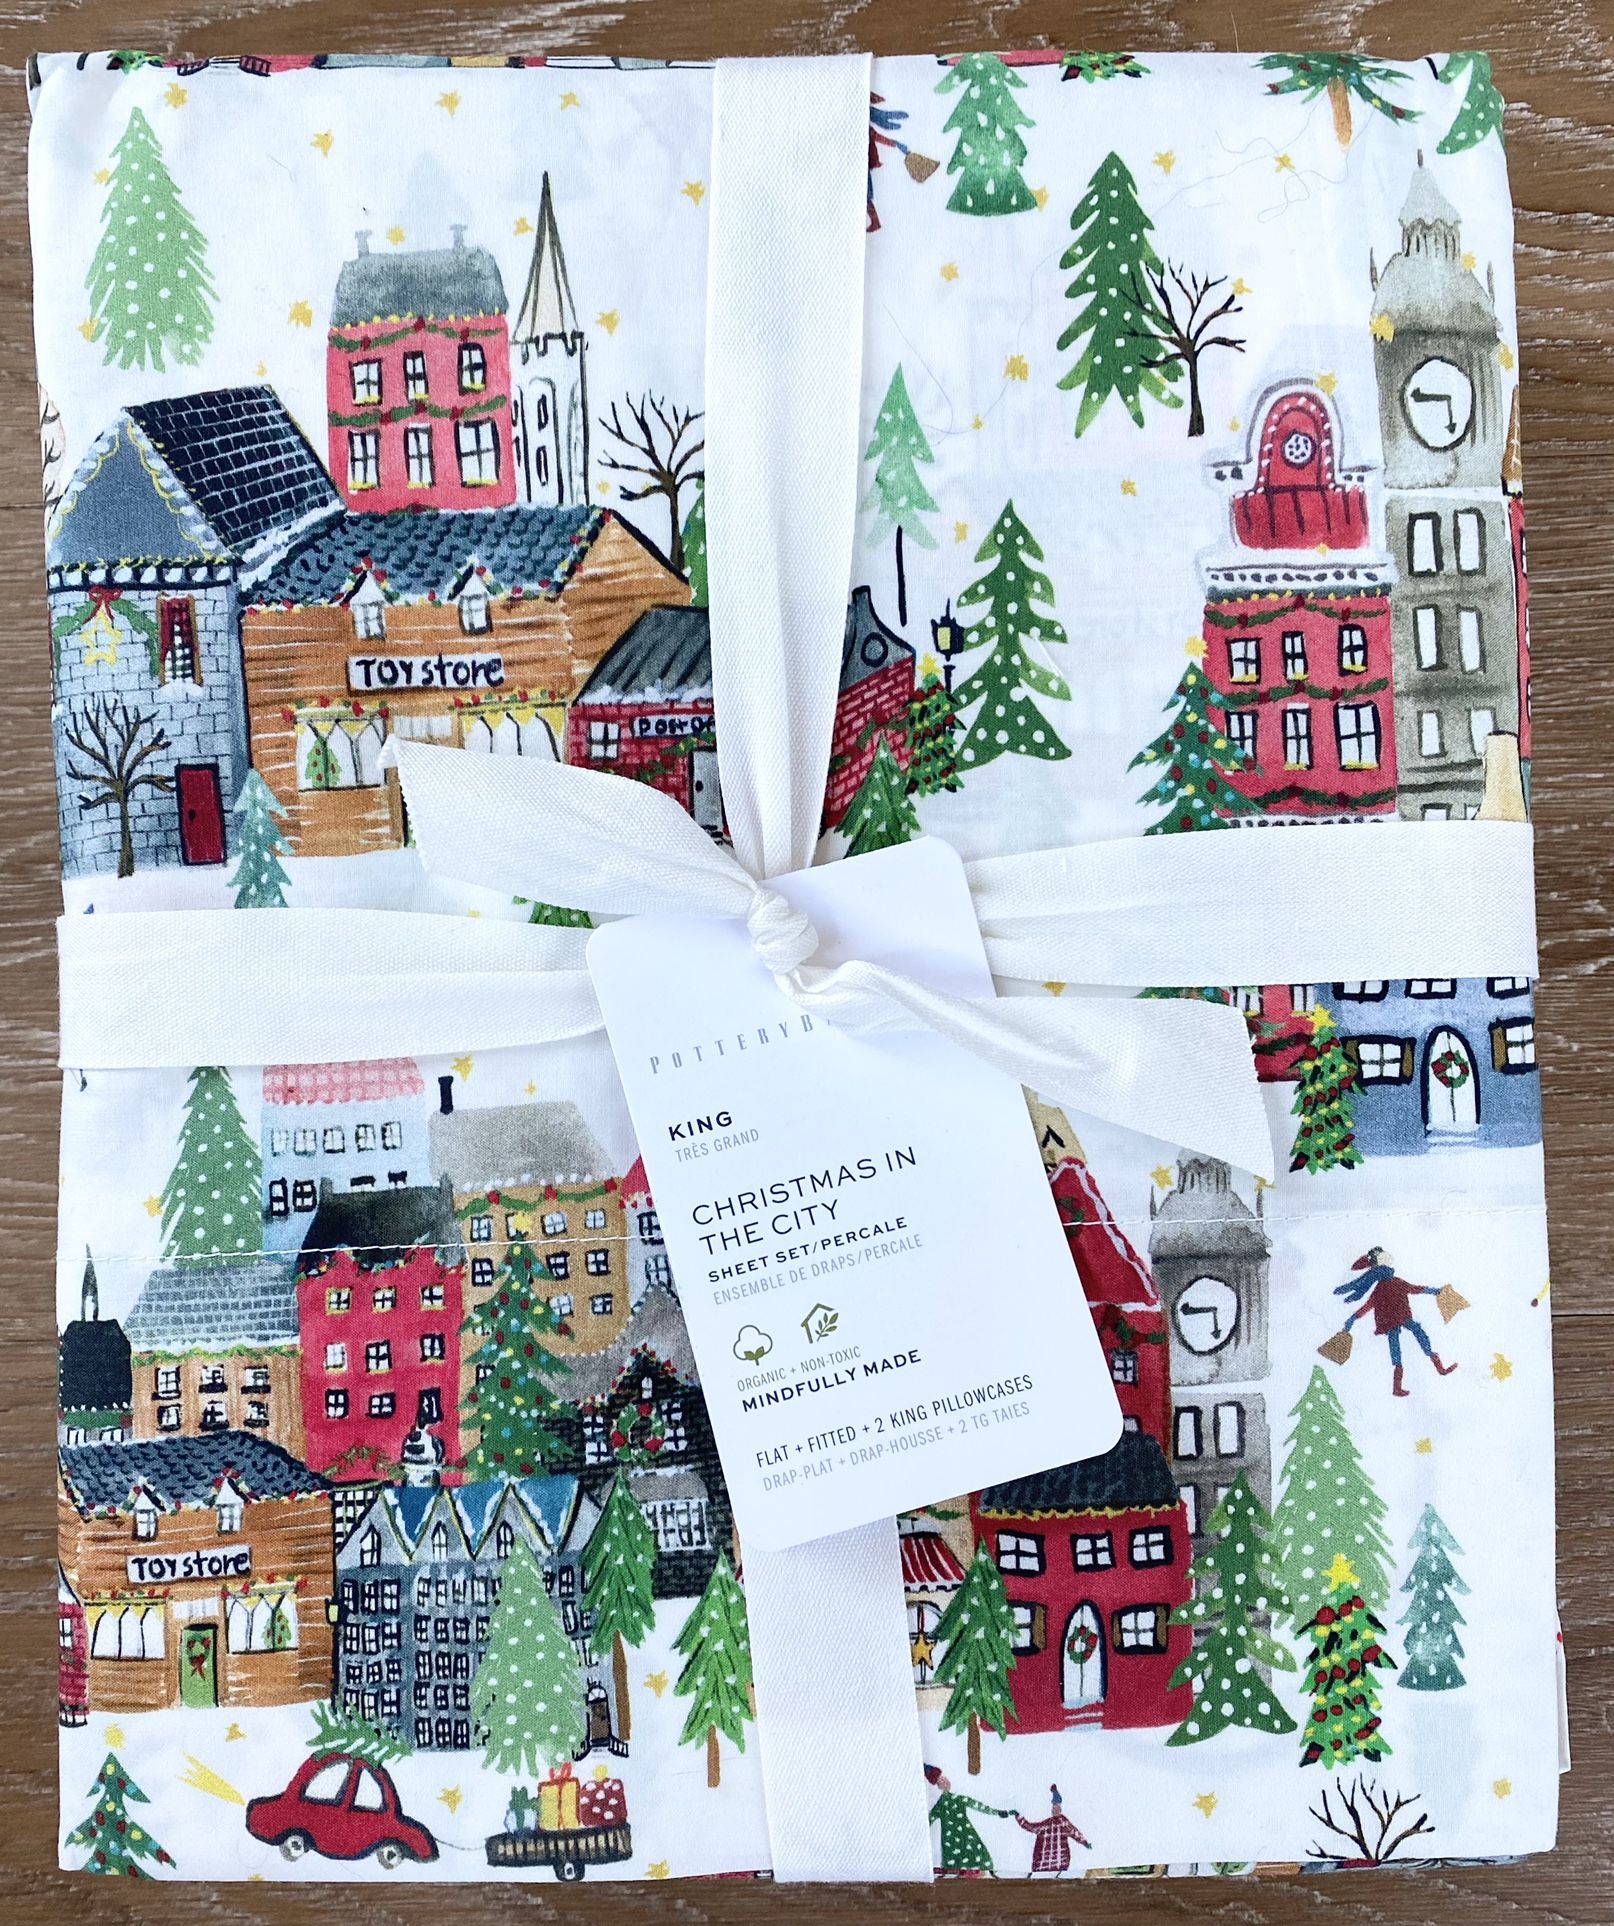 Pottery Barn Forest Christmas In the City Organic Cotton King Sheet Set, NWT Retail $149